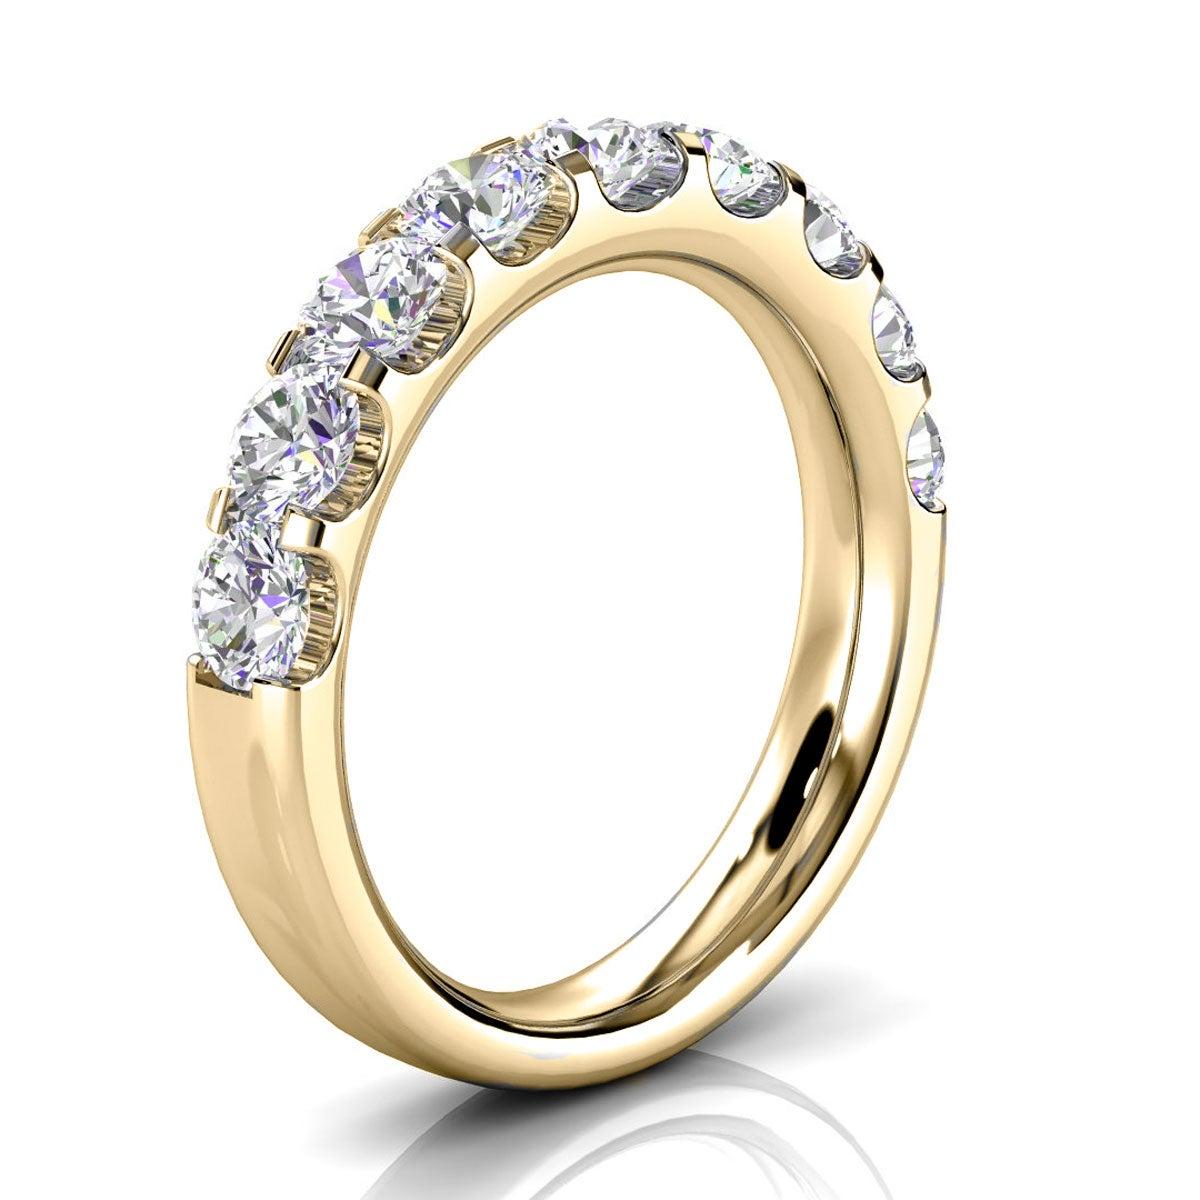 For Sale:  18k Yellow Gold Valerie Micro-Prong Diamond Ring '1 1/2 Ct. Tw' 2